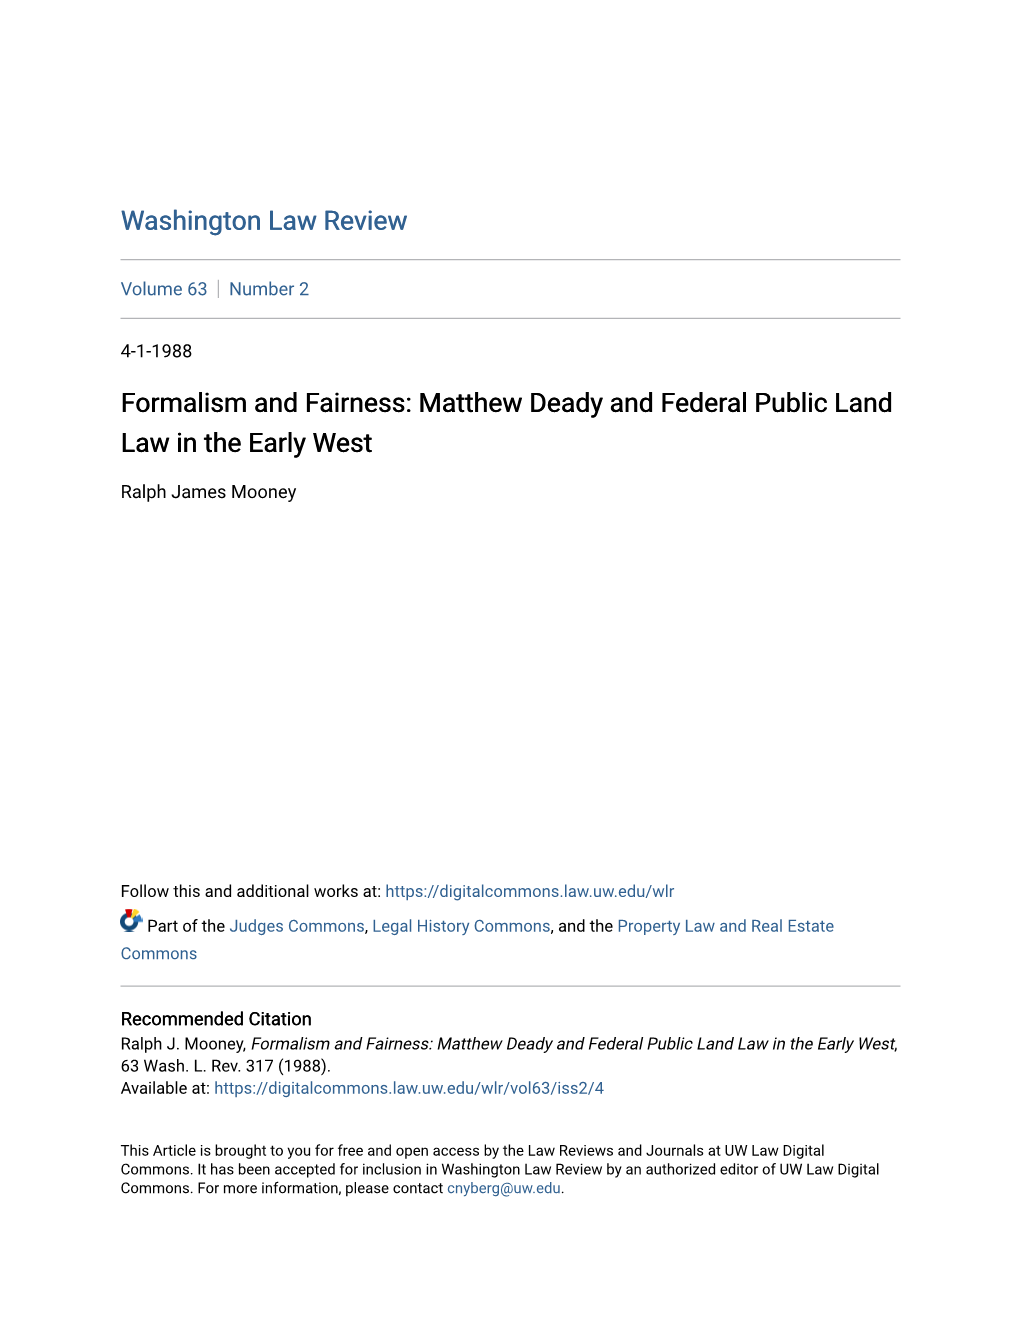 Matthew Deady and Federal Public Land Law in the Early West